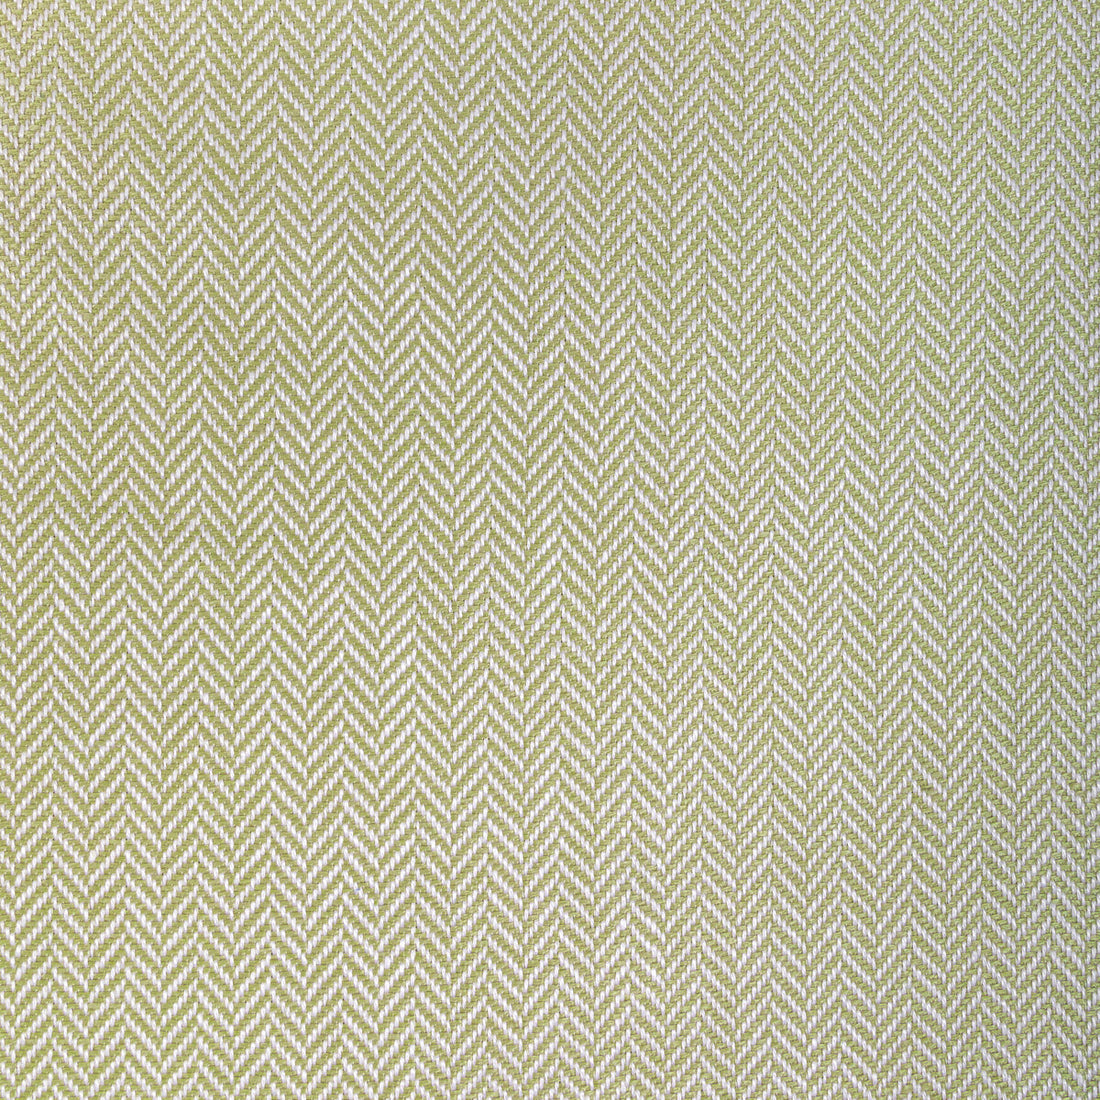 Kerolay Linen Weave fabric in celery color - pattern 8022107.3.0 - by Brunschwig &amp; Fils in the Lorient Weaves collection